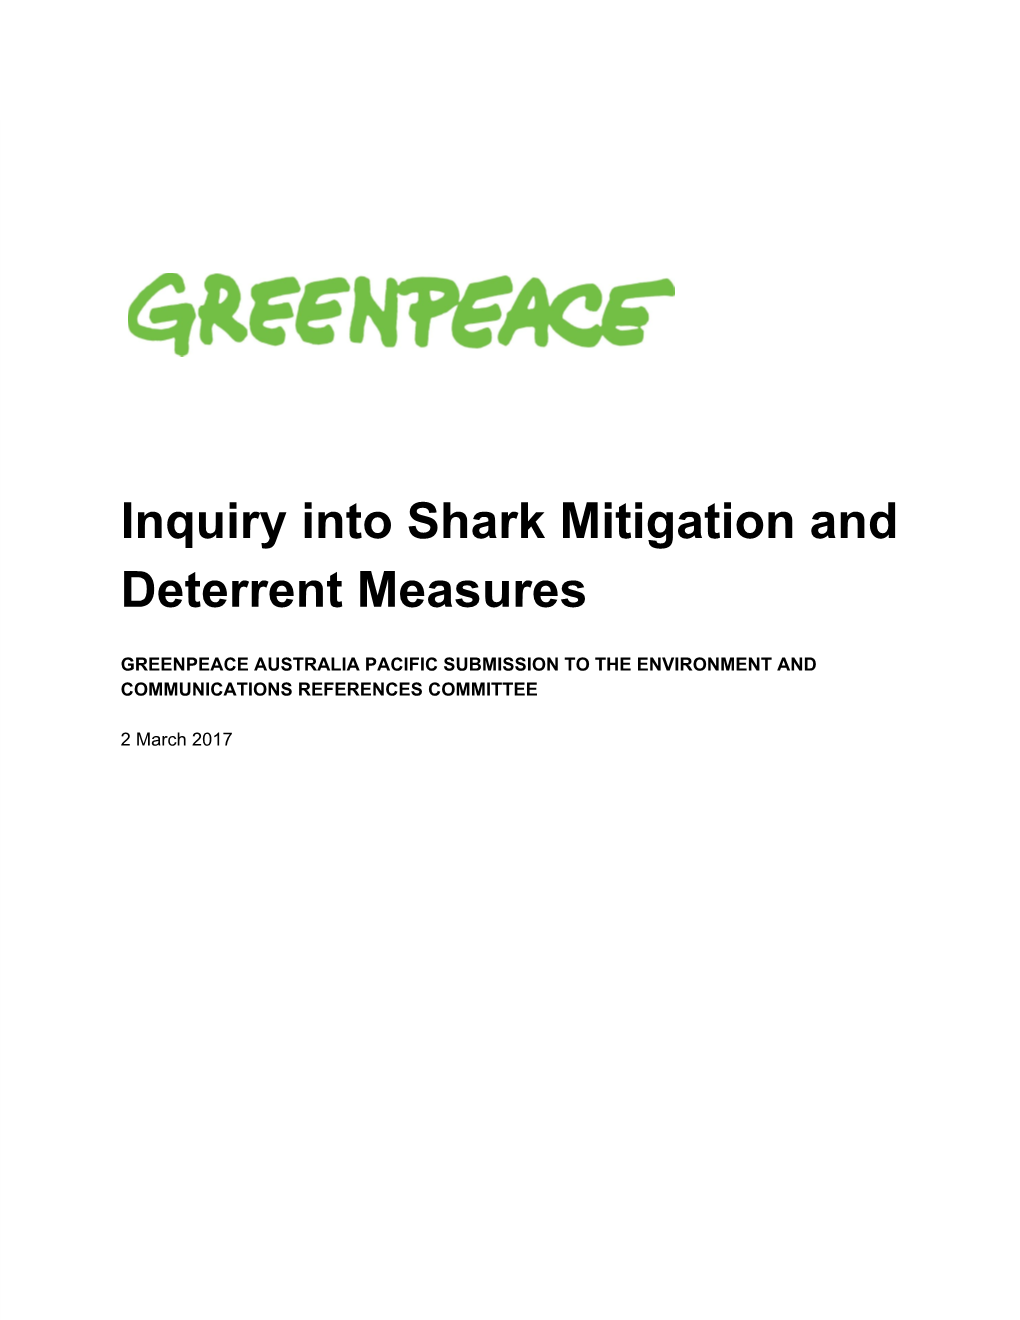 Inquiry Into Shark Mitigation and Deterrent Measures